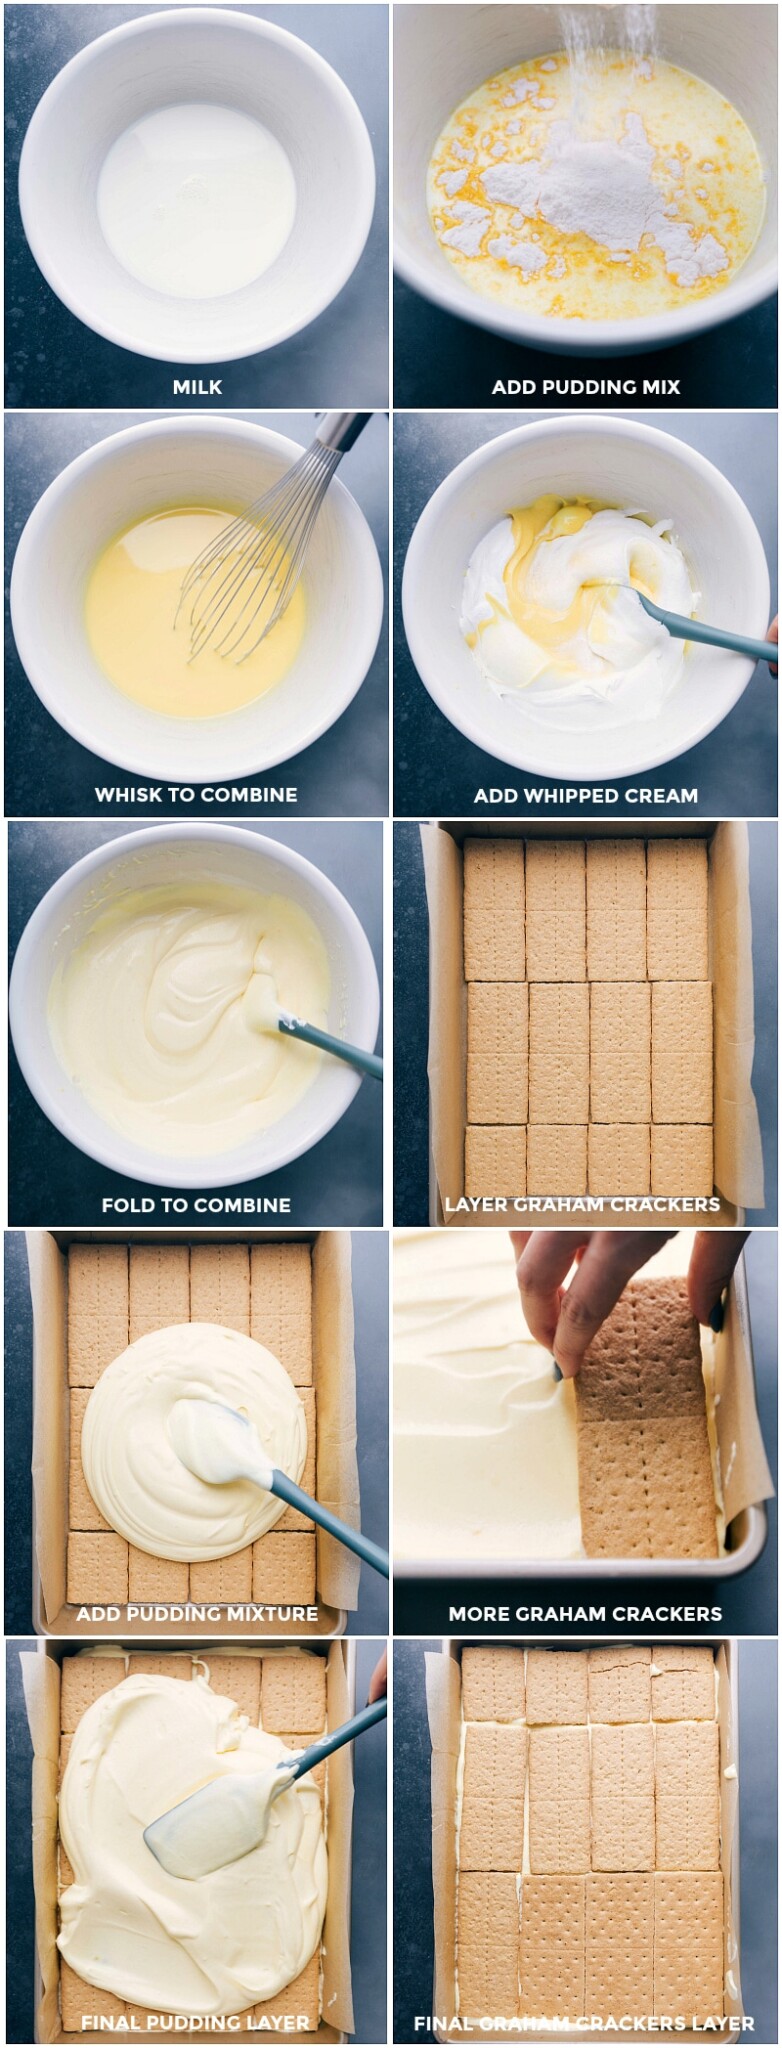 Process shots-- images of the pudding filling being made and layered between layers of graham crackers.